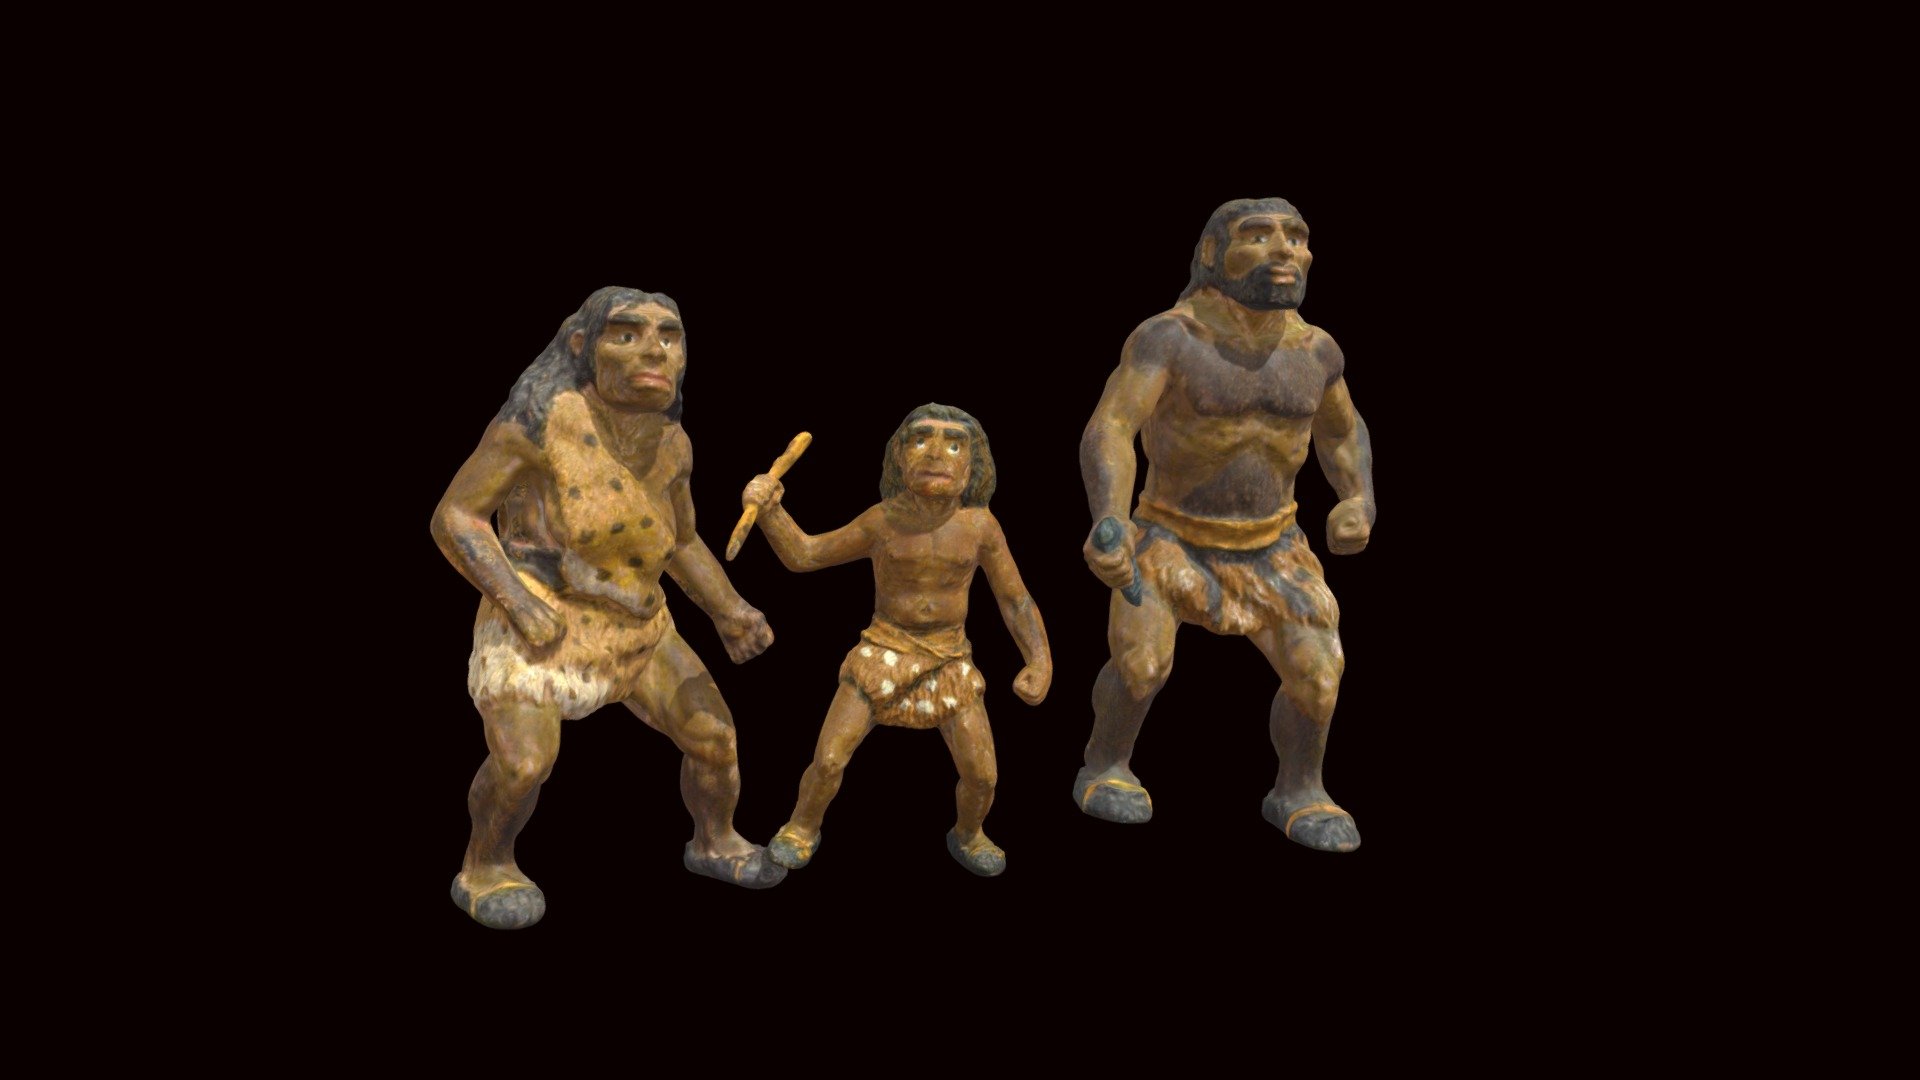 These Neanderthal figurines were individually 3D scanned with a NextEngine Desktop 3D scanner and combined into a single file using Meshlab 3d model